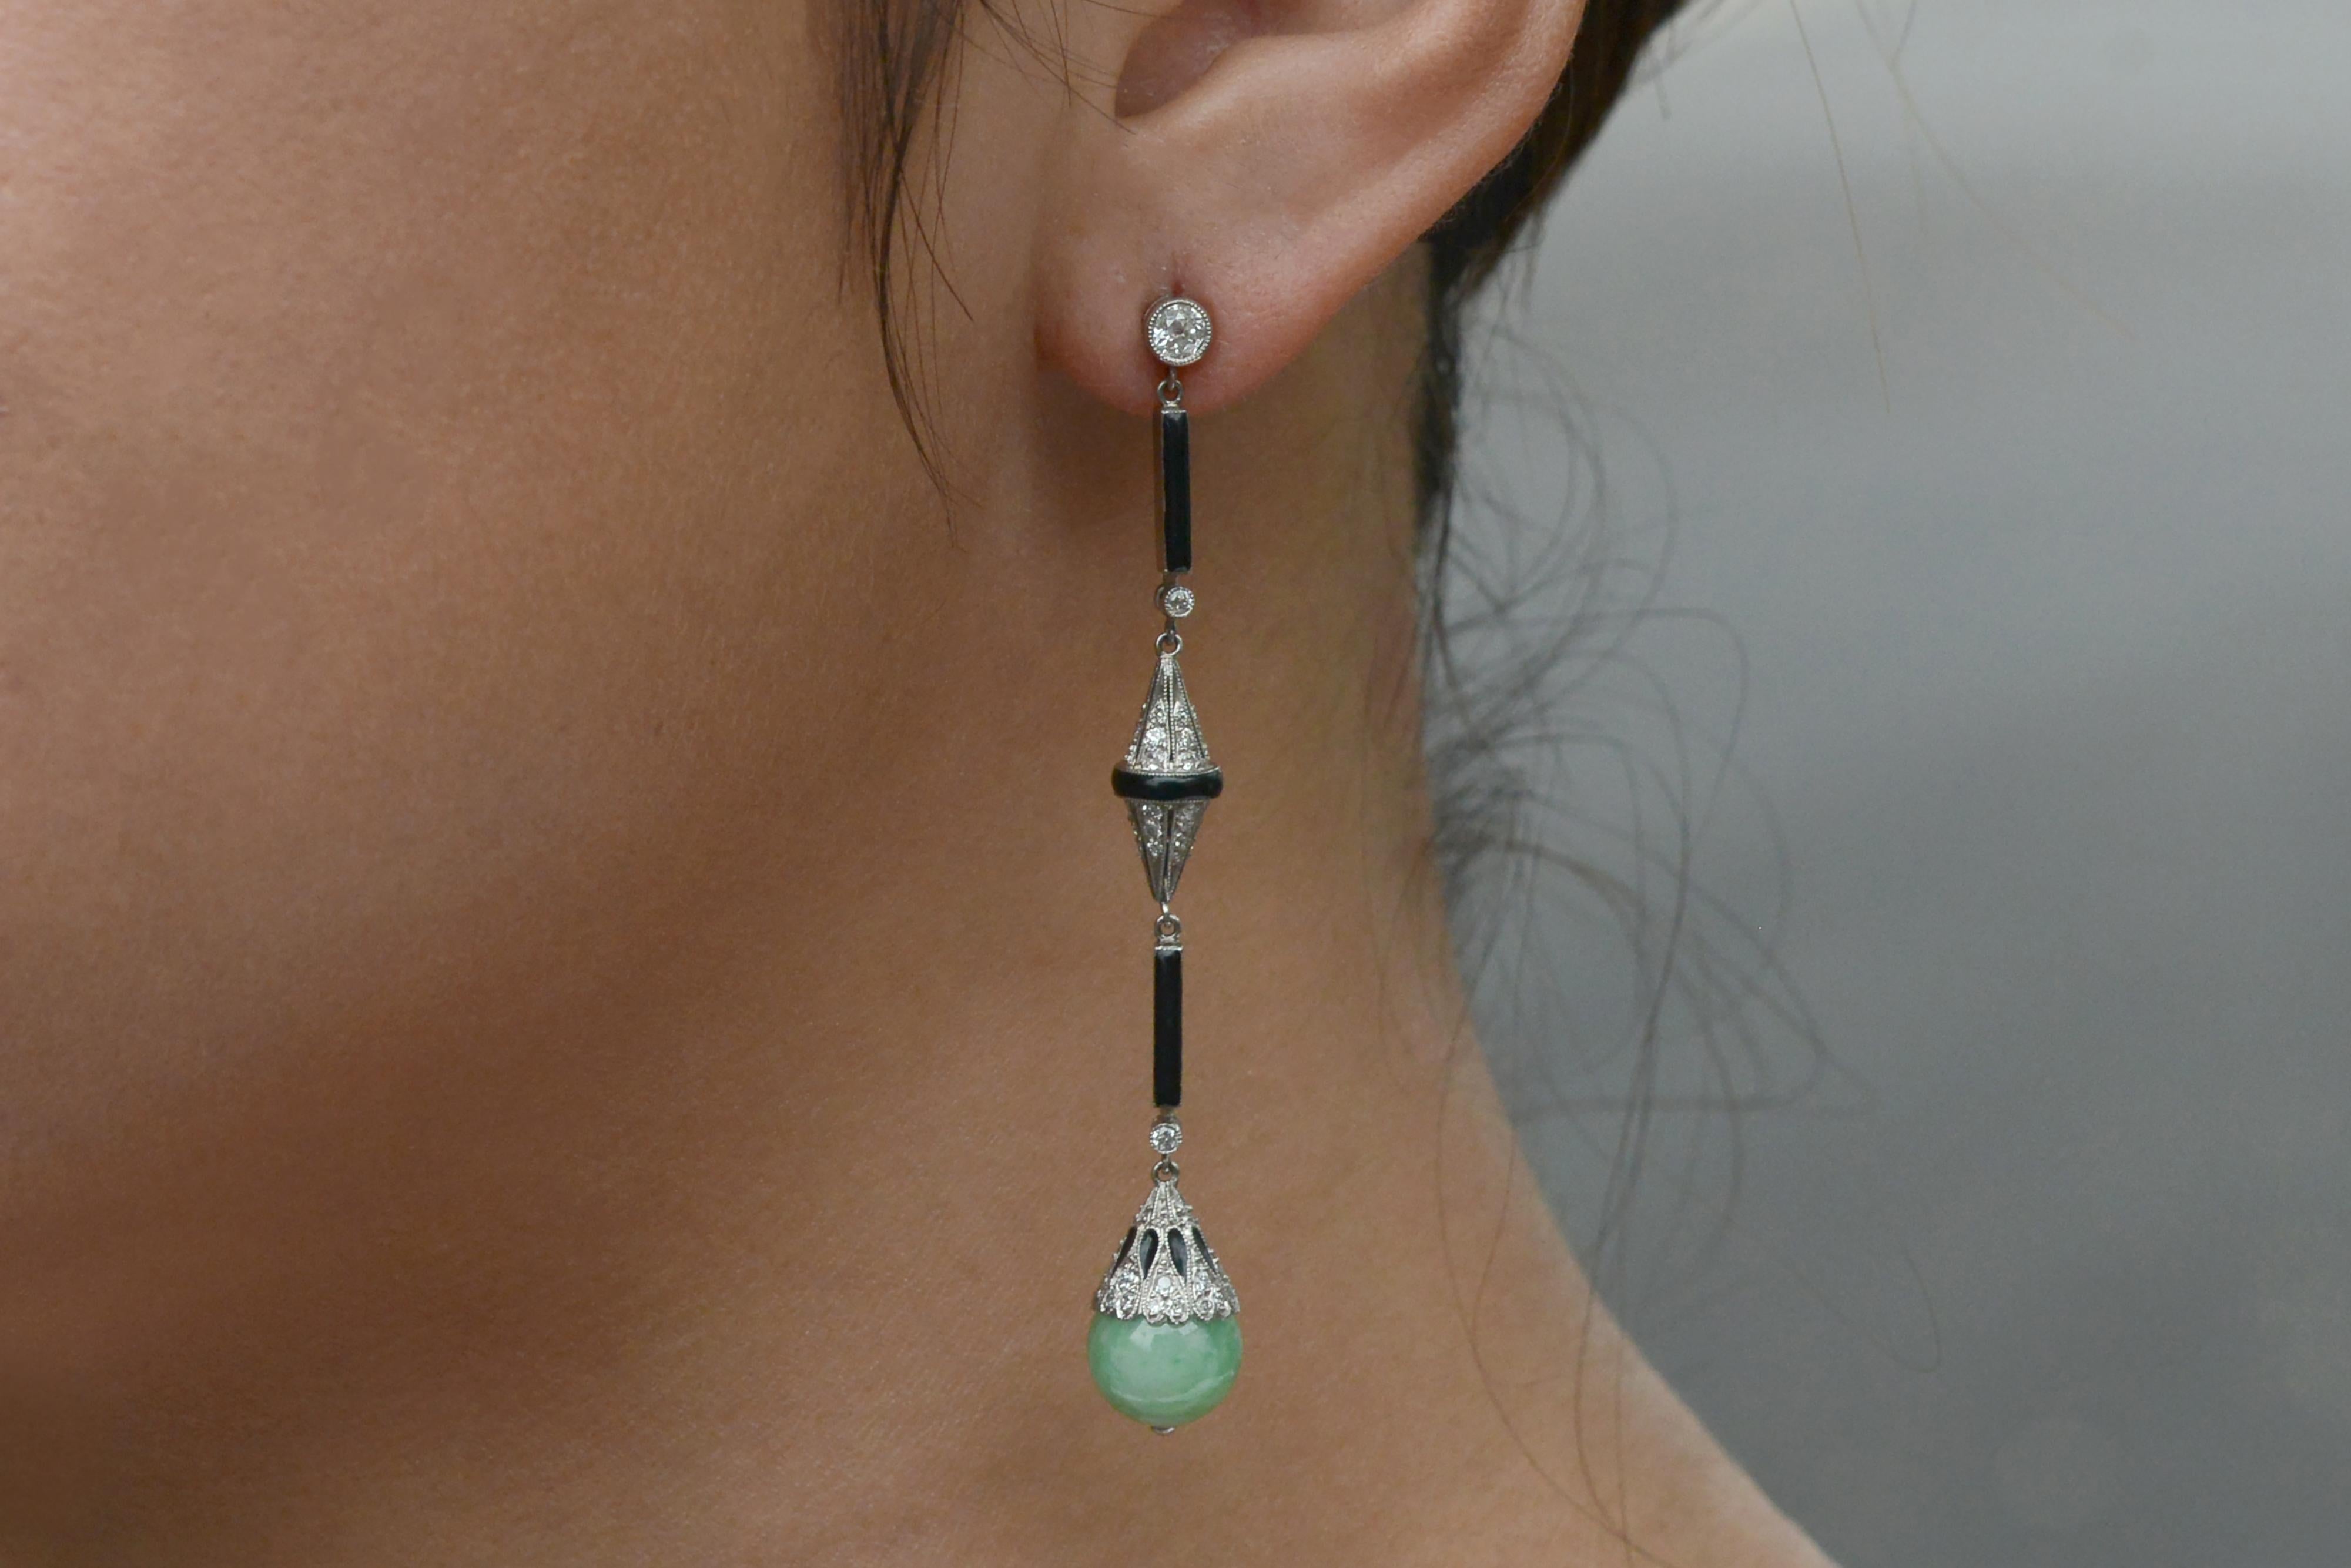 These daring and dazzling dangles are quite the pair! Reigning from the Art Deco era, these long drop earrings descend upon a dynamic combination of jade, black onyx and brilliant old European cut diamonds. Finishing off this ravishing combination